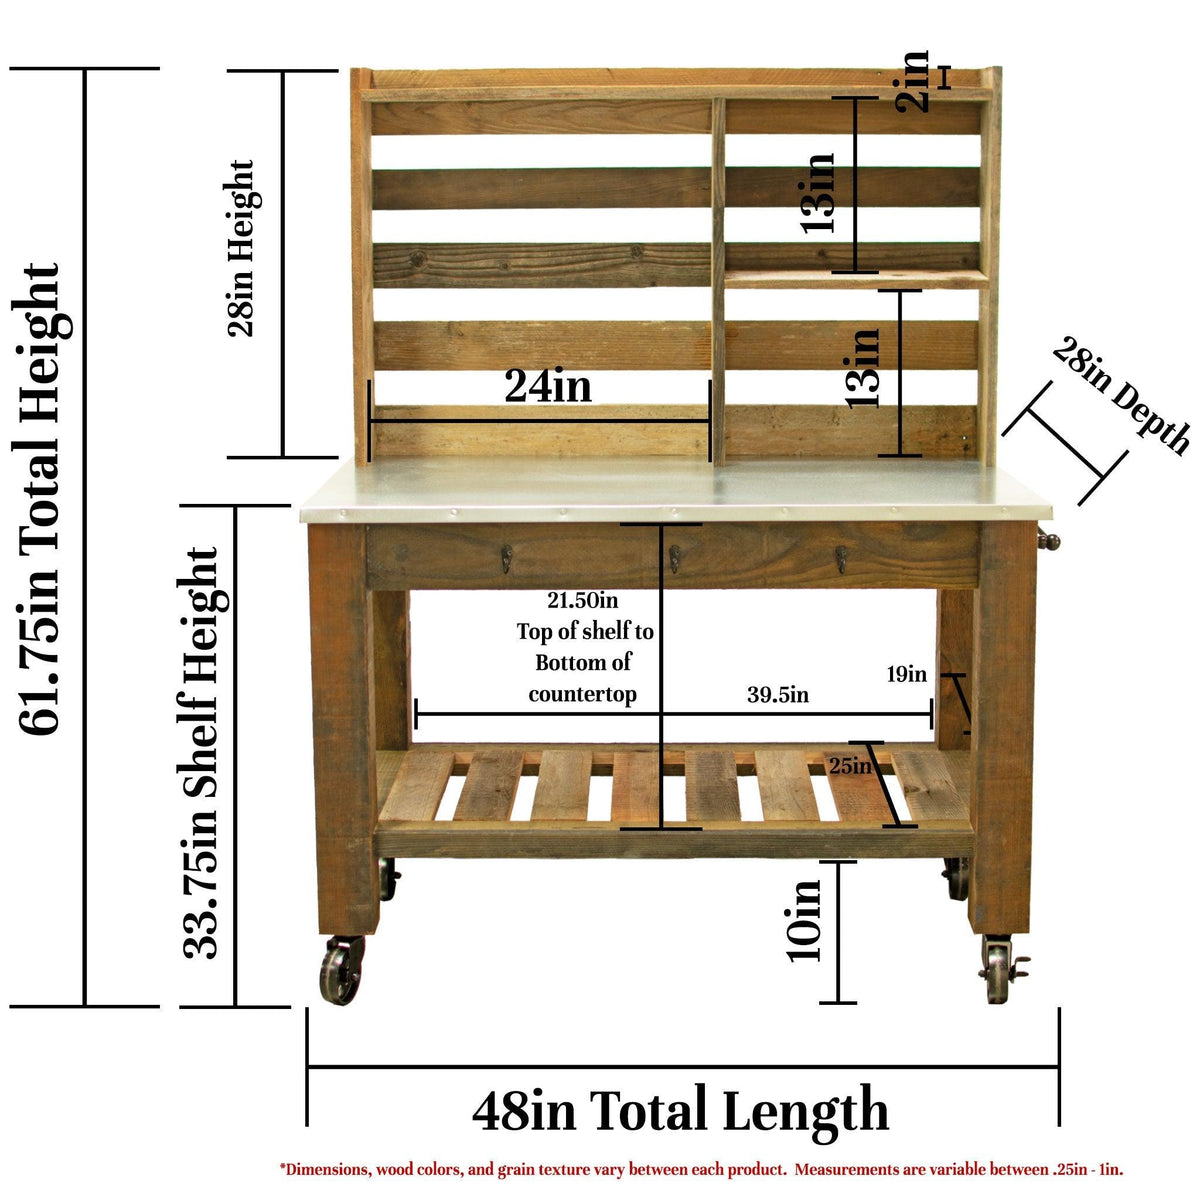 Dimensions and specs of Lee Display's Potting Table made with 5in Black Casters.